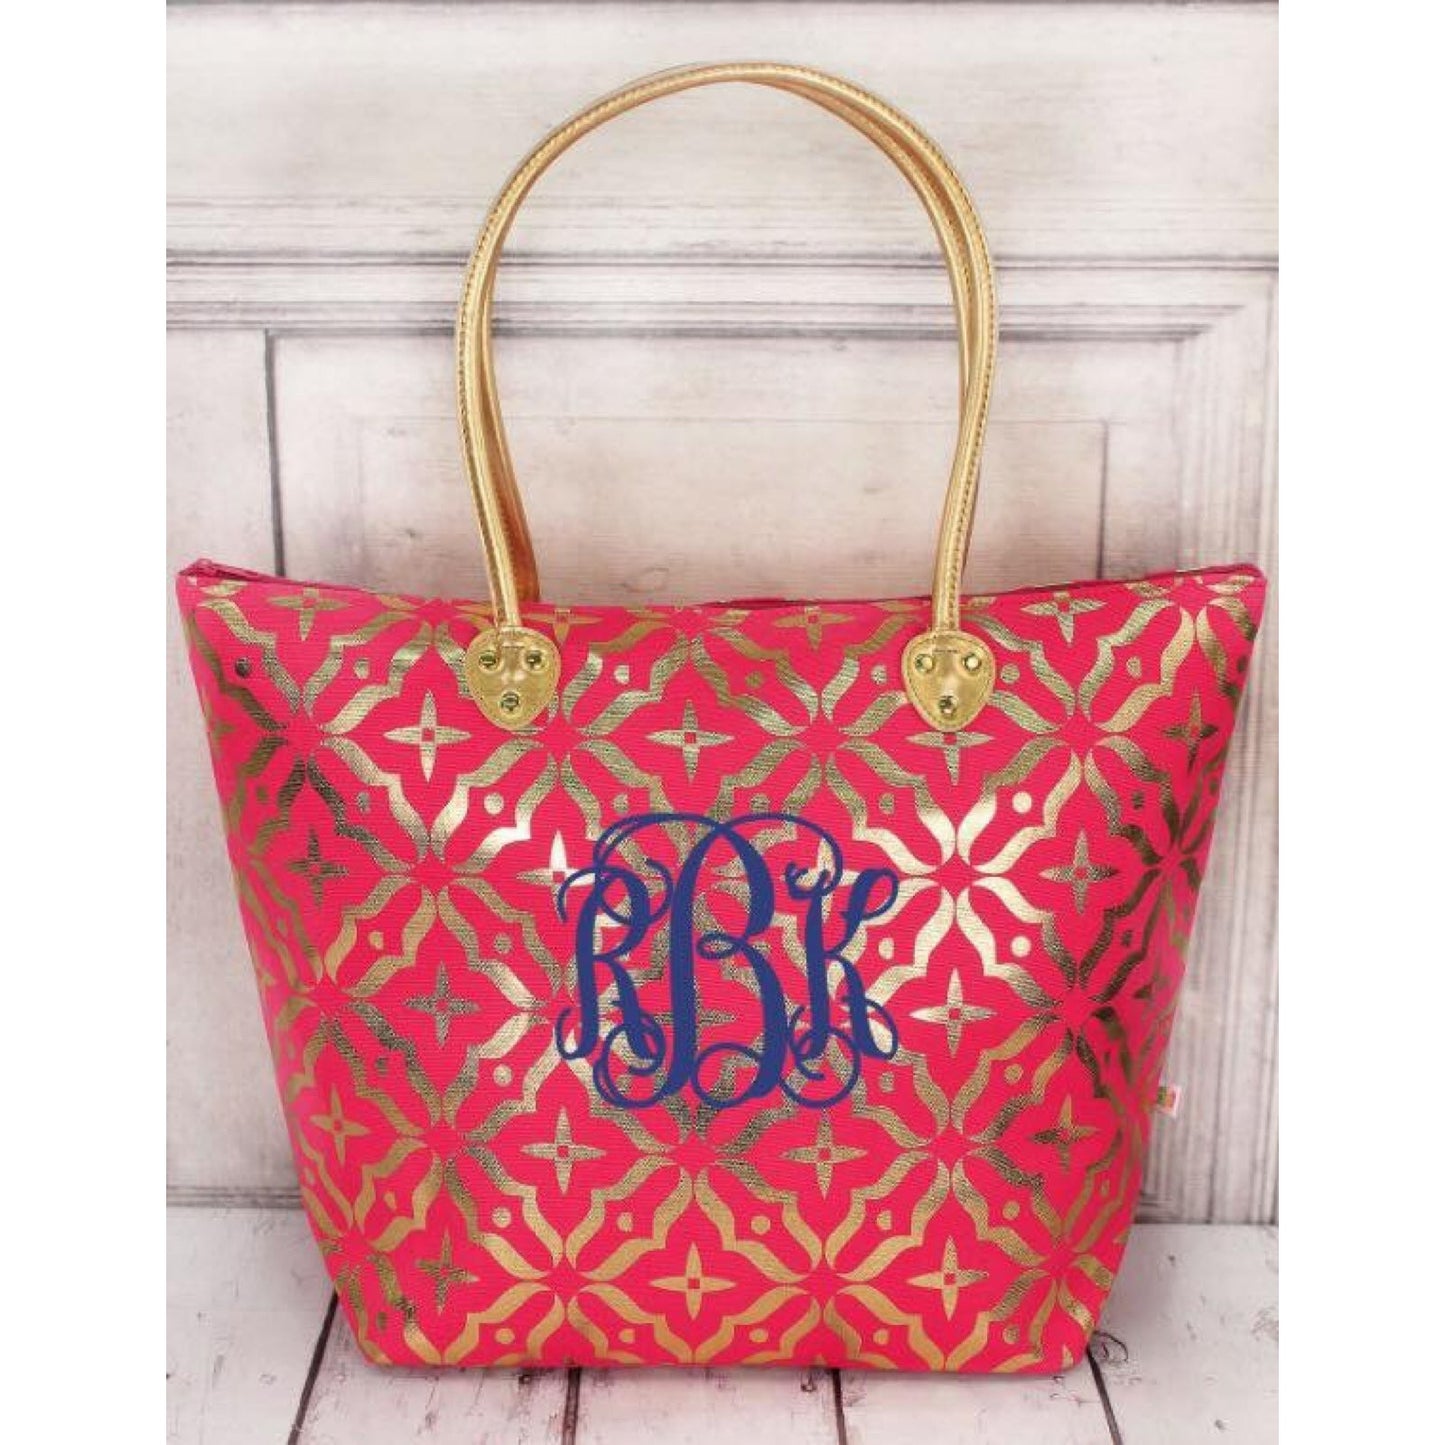 New gold & pink oversized tote